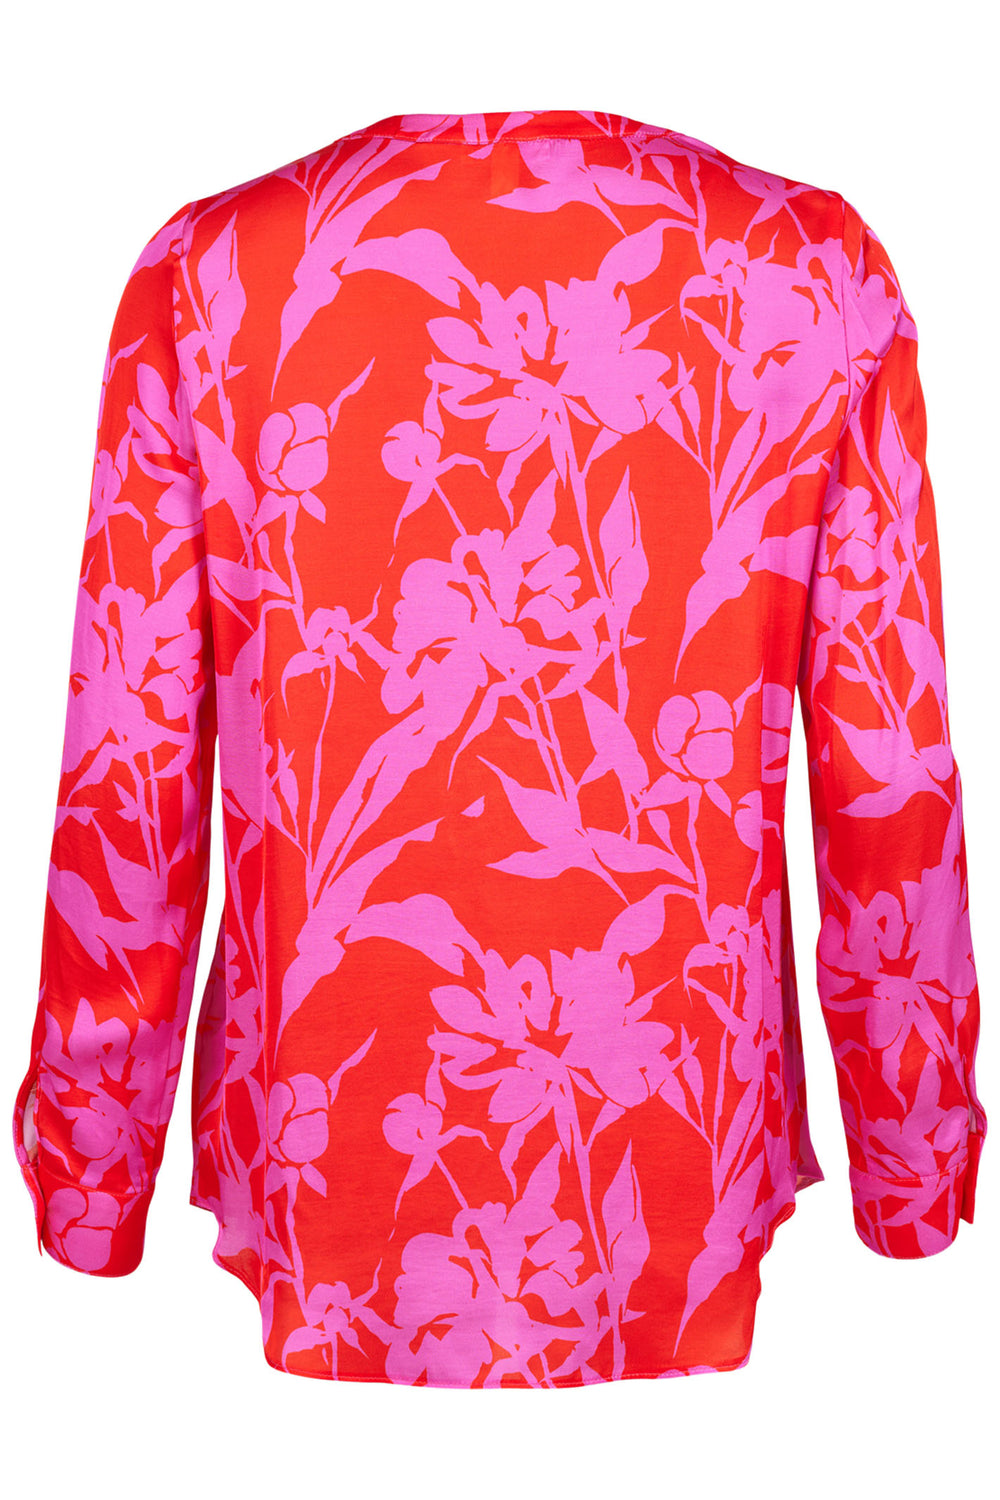 Robell R.O.B 56437 32 Red & Hot Pink Print Hannah Blouse - Experience Boutique